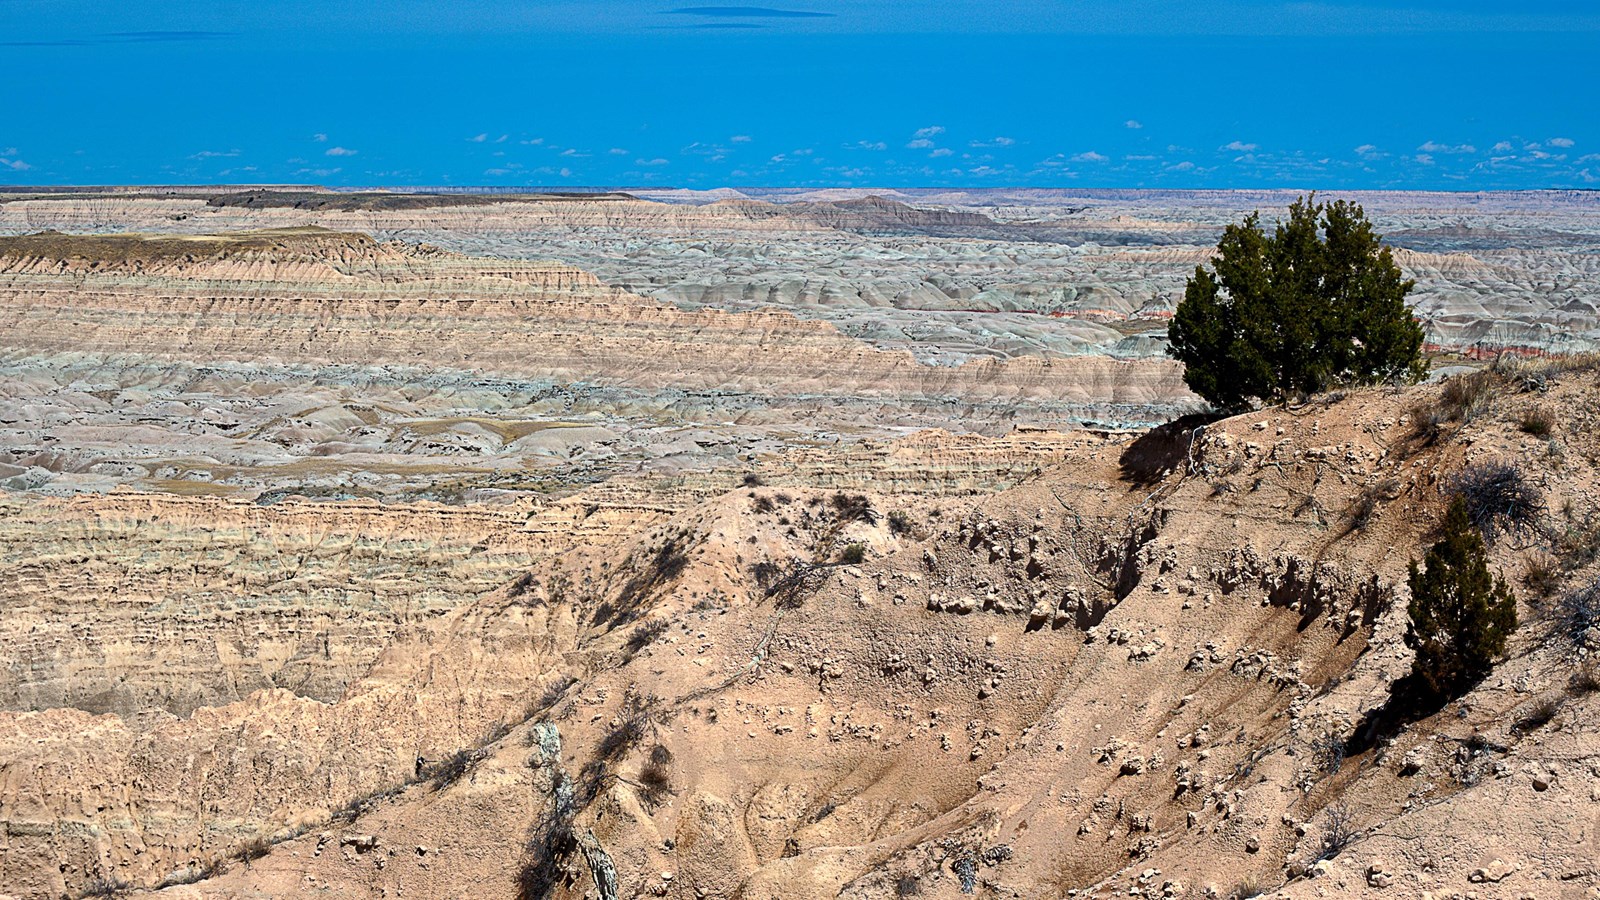 Jagged badlands formations extend into the horizon under a blue sky.